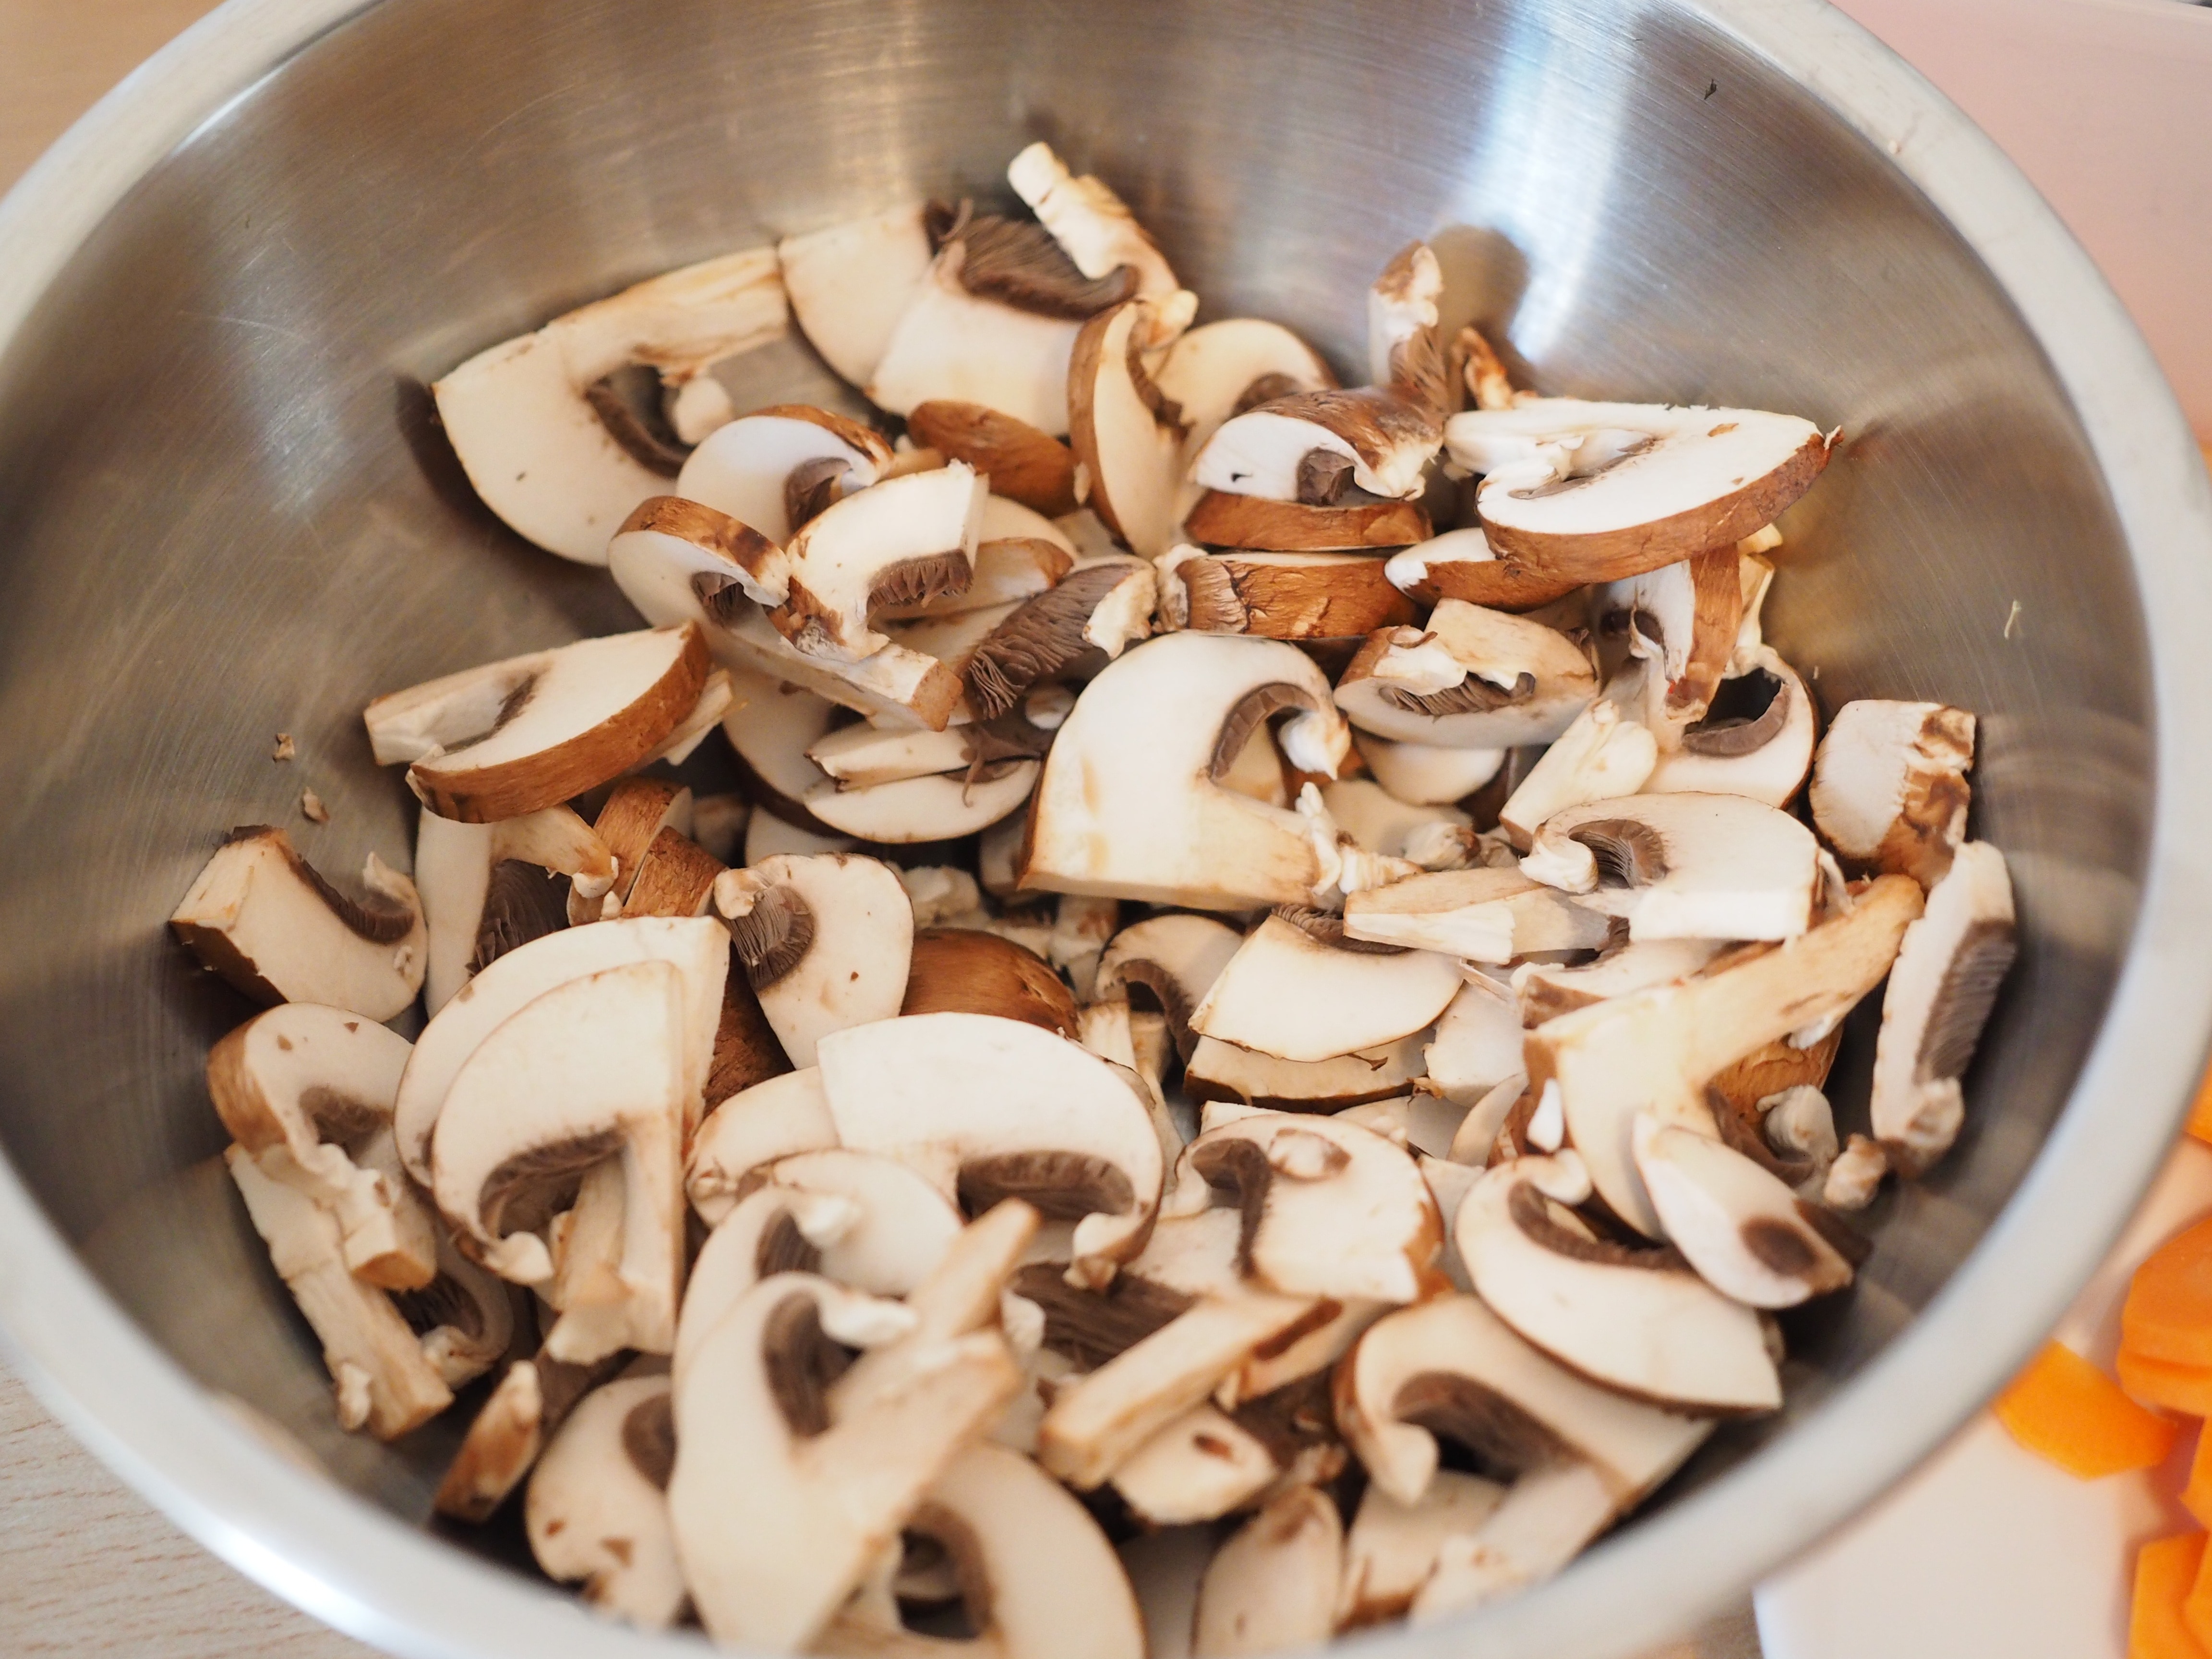 Preparation, Eat, Mushrooms, Ingredient, large group of objects, indoors